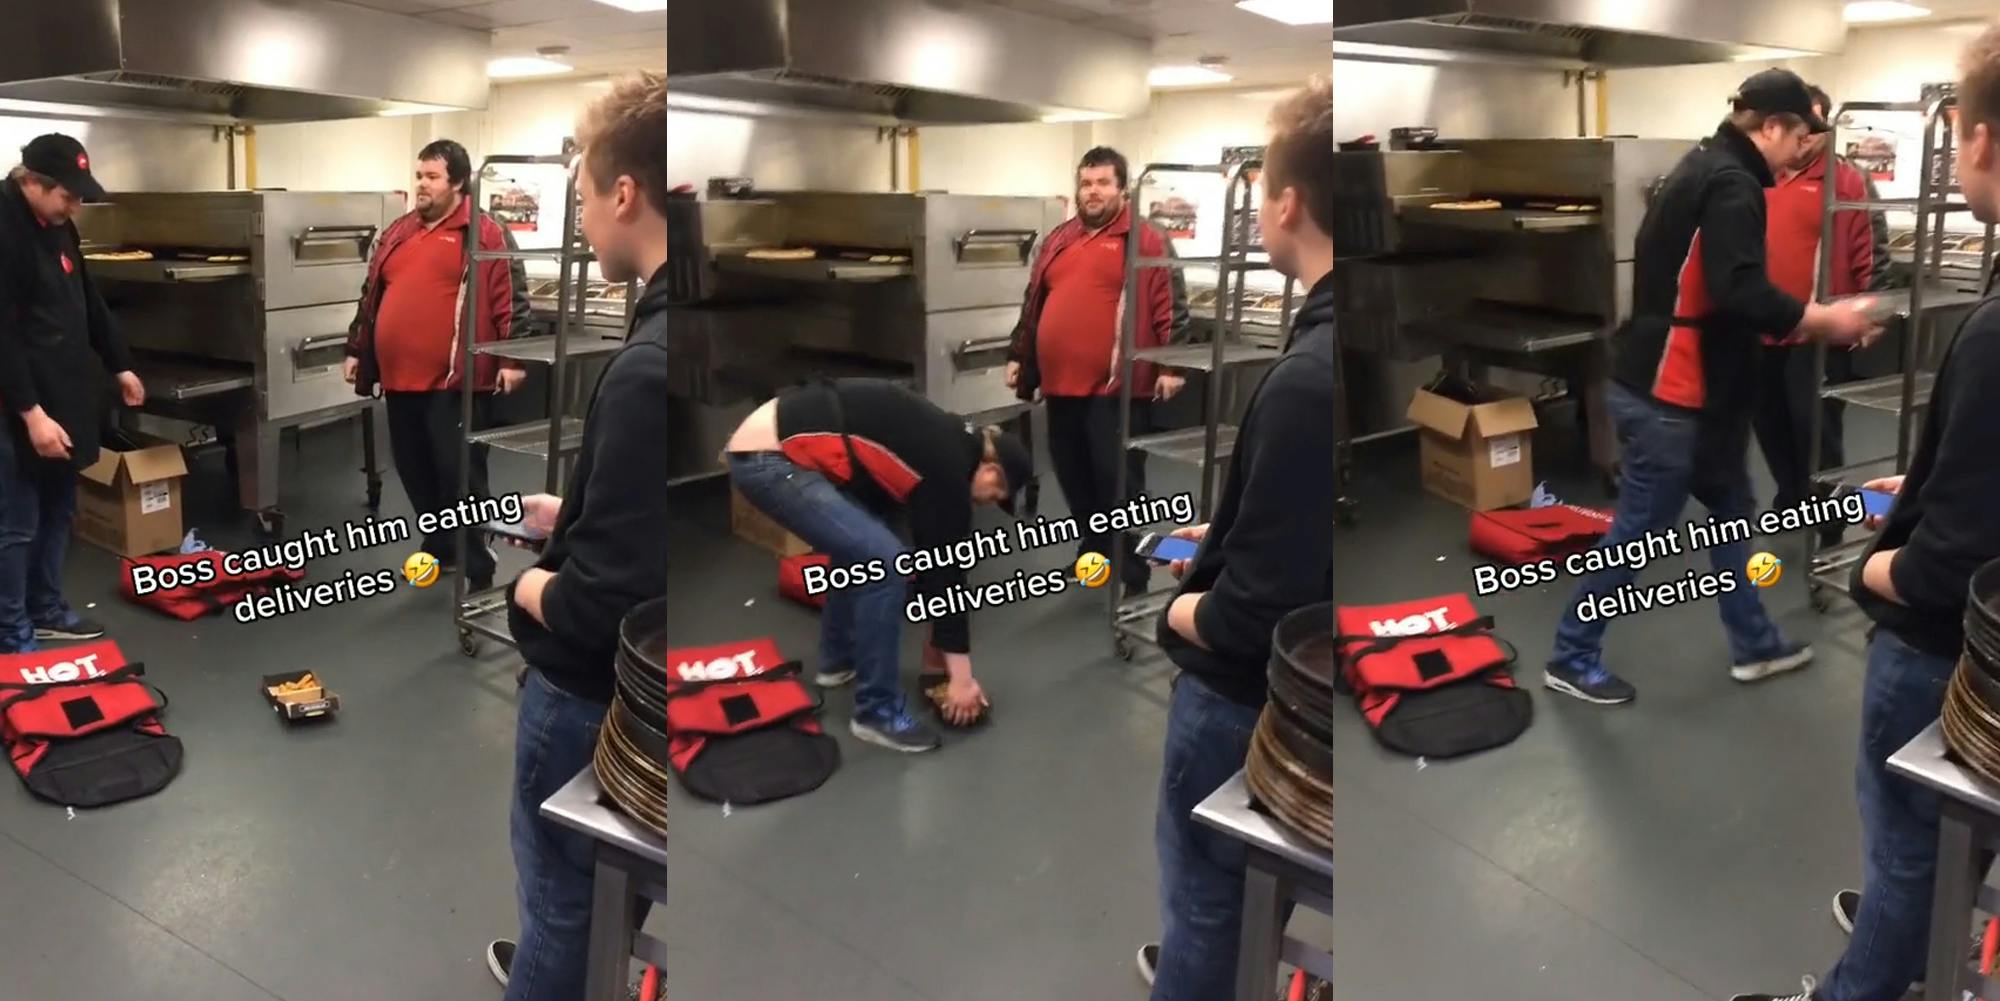 workers in kitchen with caption "Boss caught him eating deliveries" (l) workers in kitchen watching worker grab food with caption "Boss caught him eating deliveries" (c) workers in kitchen with caption "Boss caught him eating deliveries" (r)